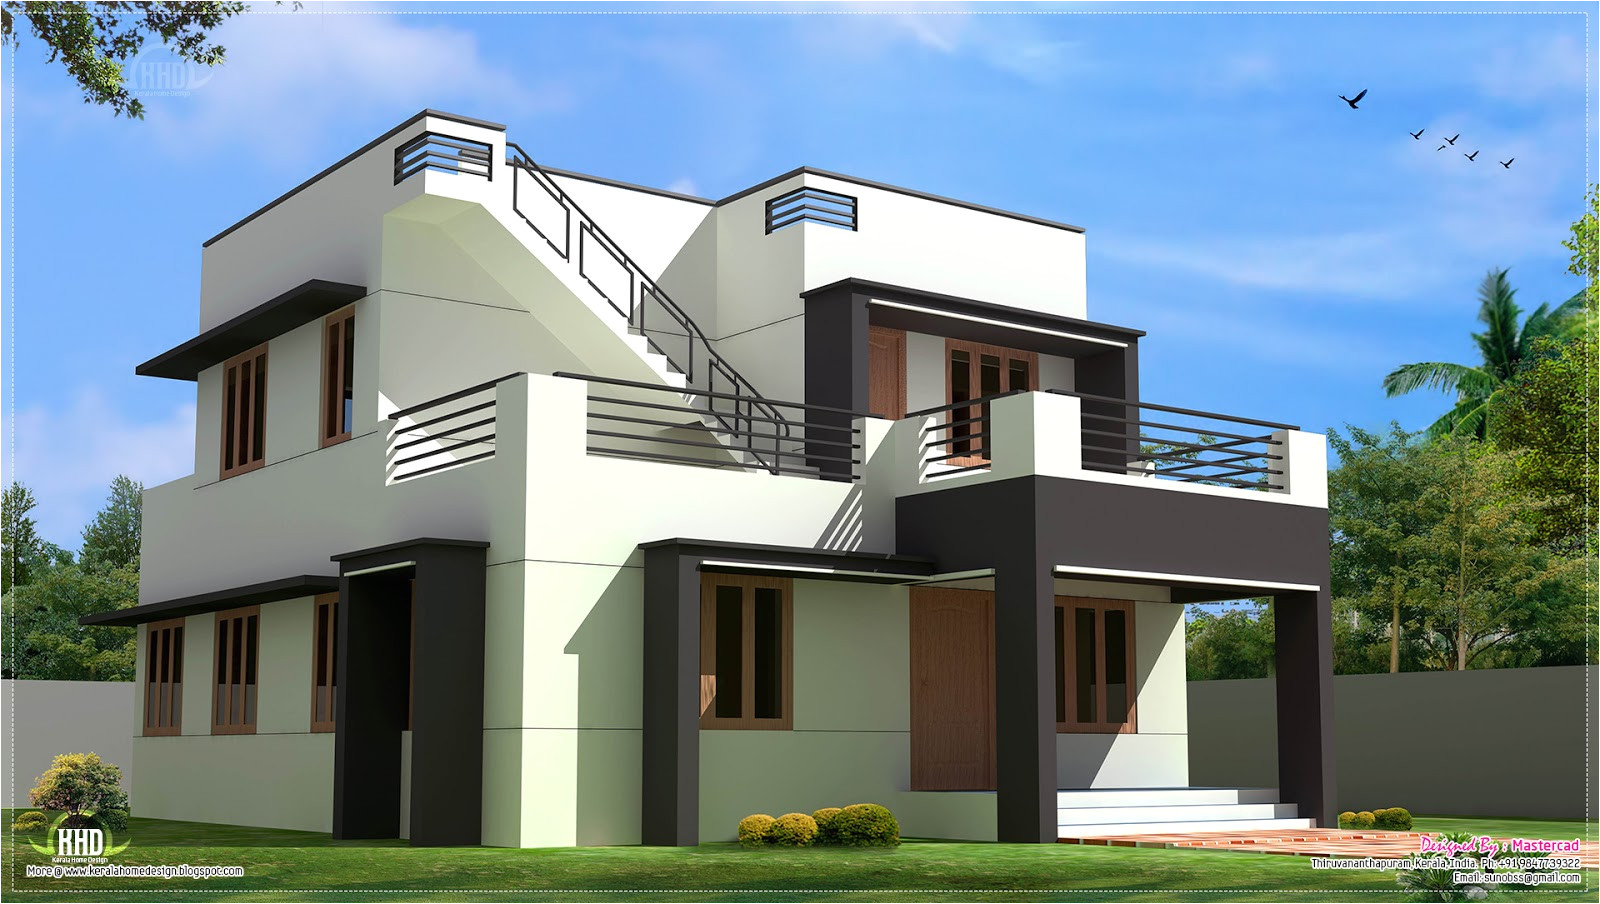 lovely house design basic home architecture ideas